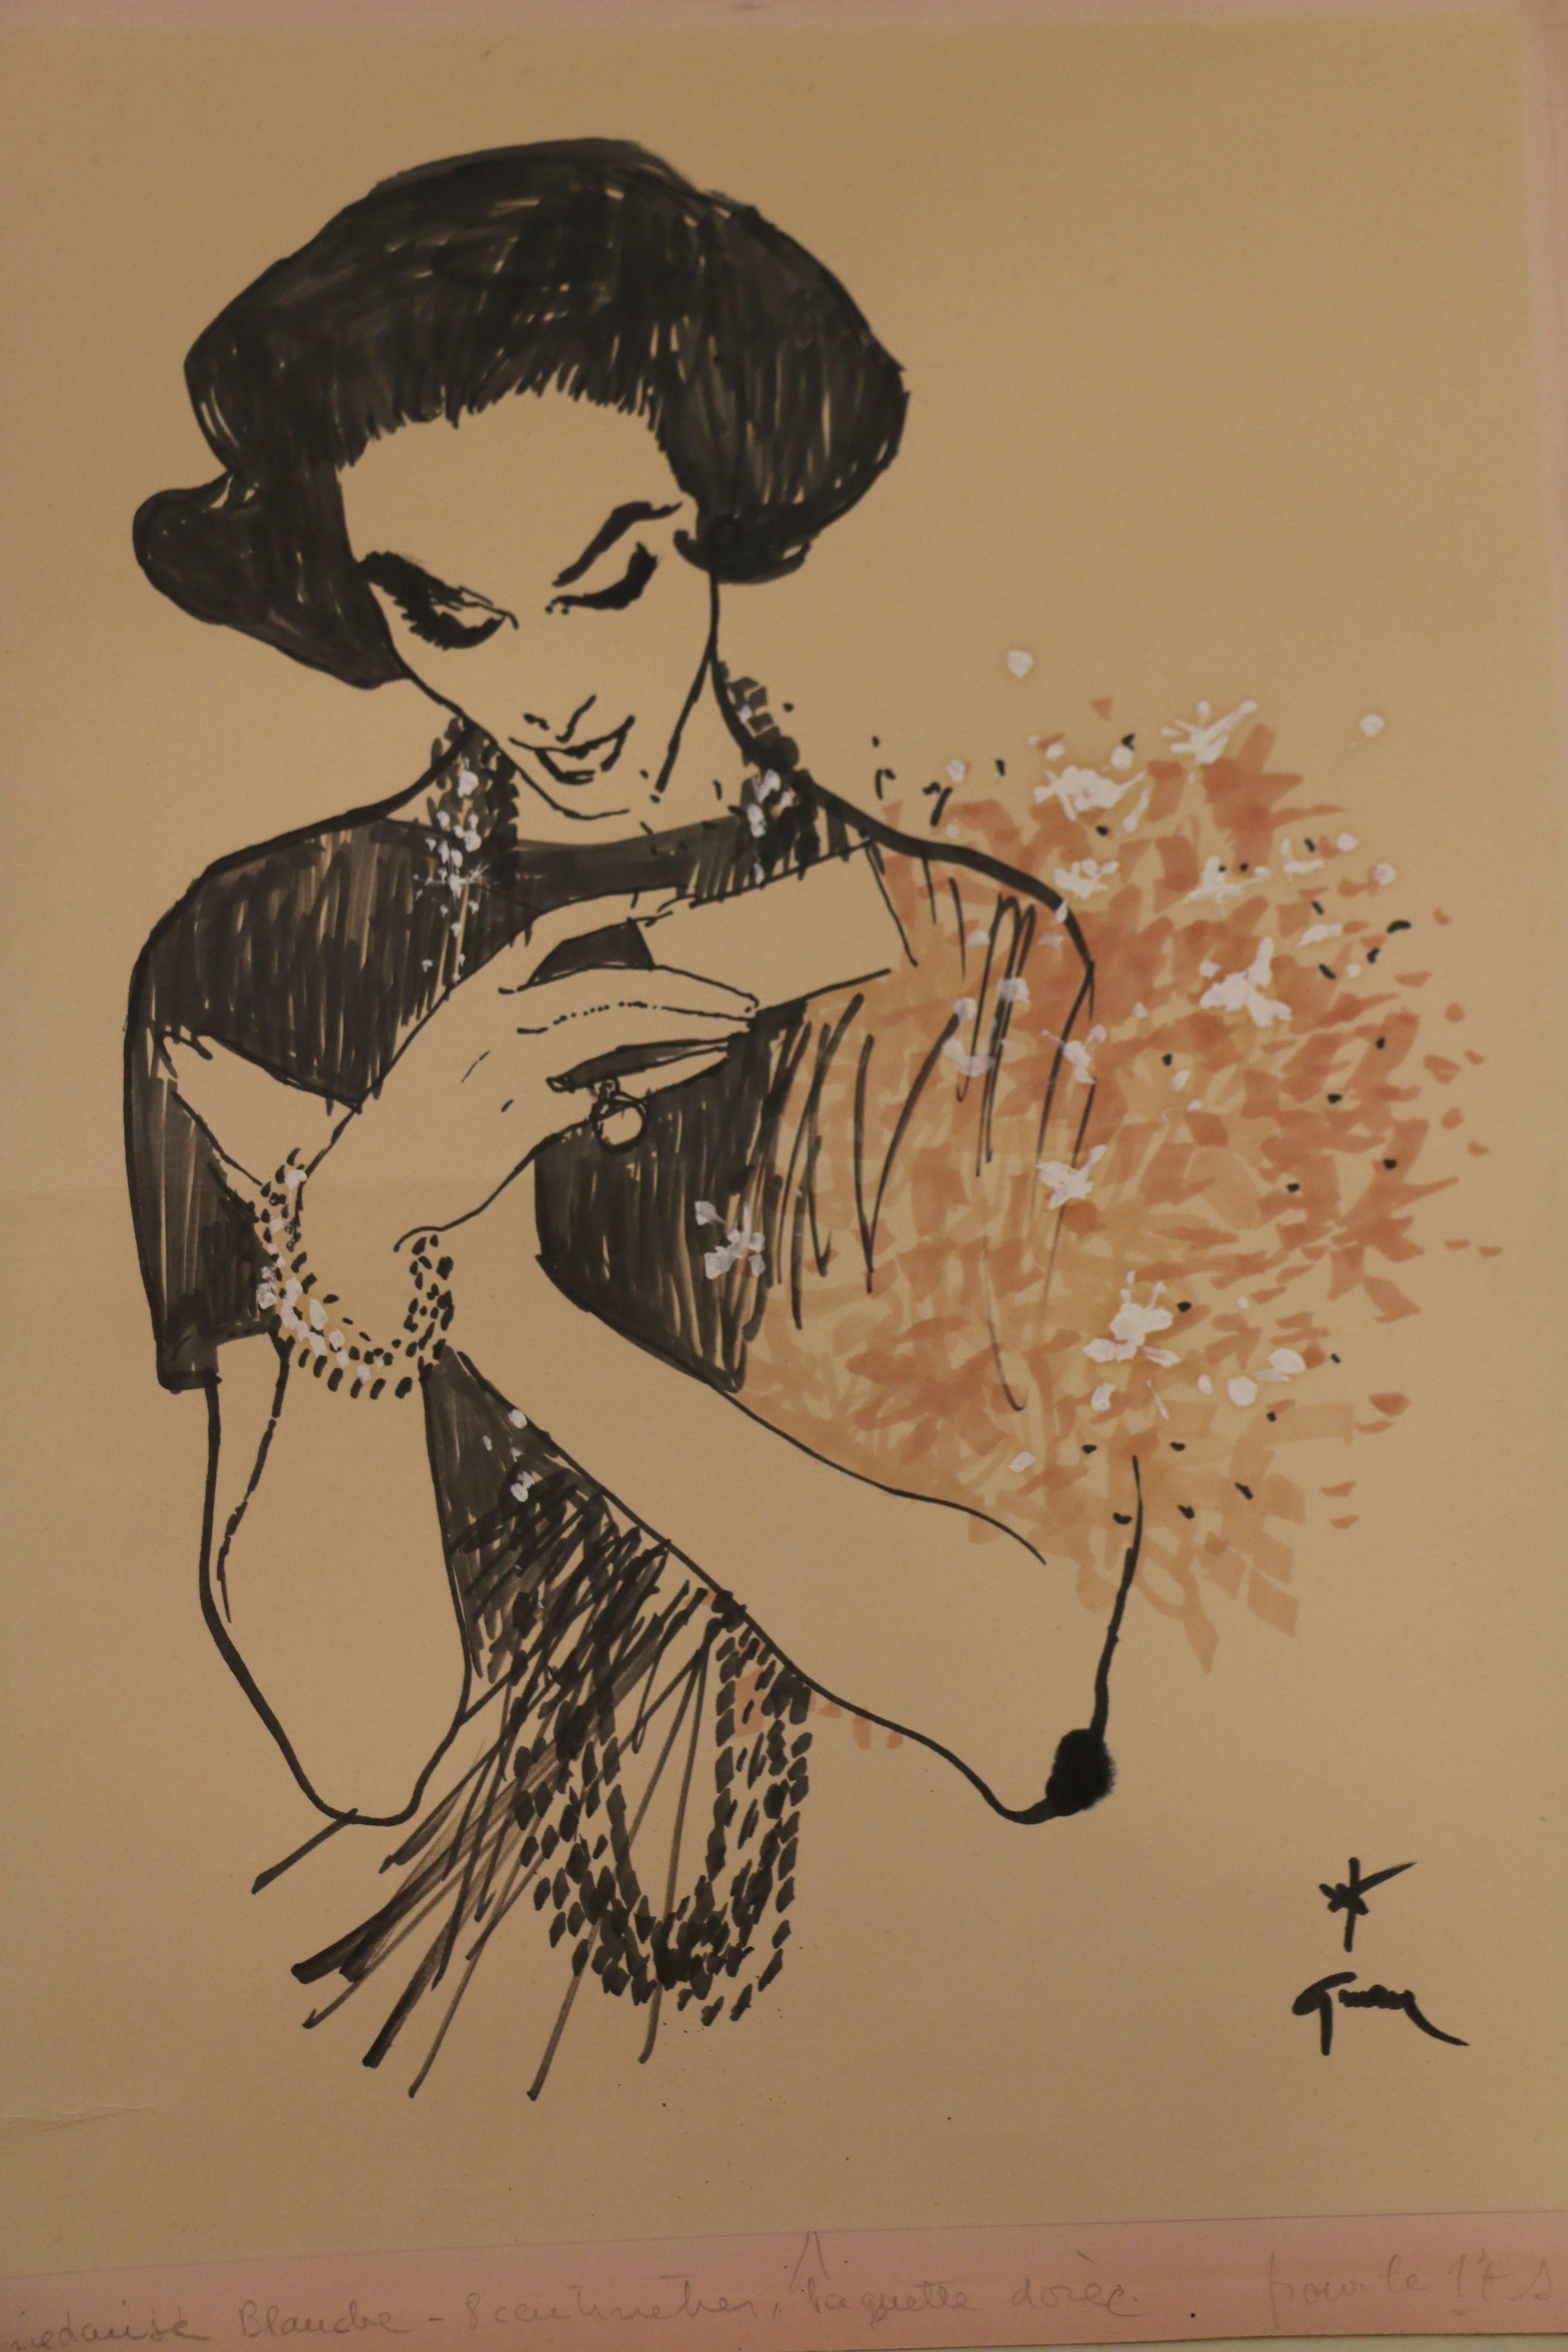 Drawing by René Gruau (1909-2004) showing a lady receiving a bunch of flowers. Ink and watercolor on paper. Signed bottom right.
The drawing is annotated 